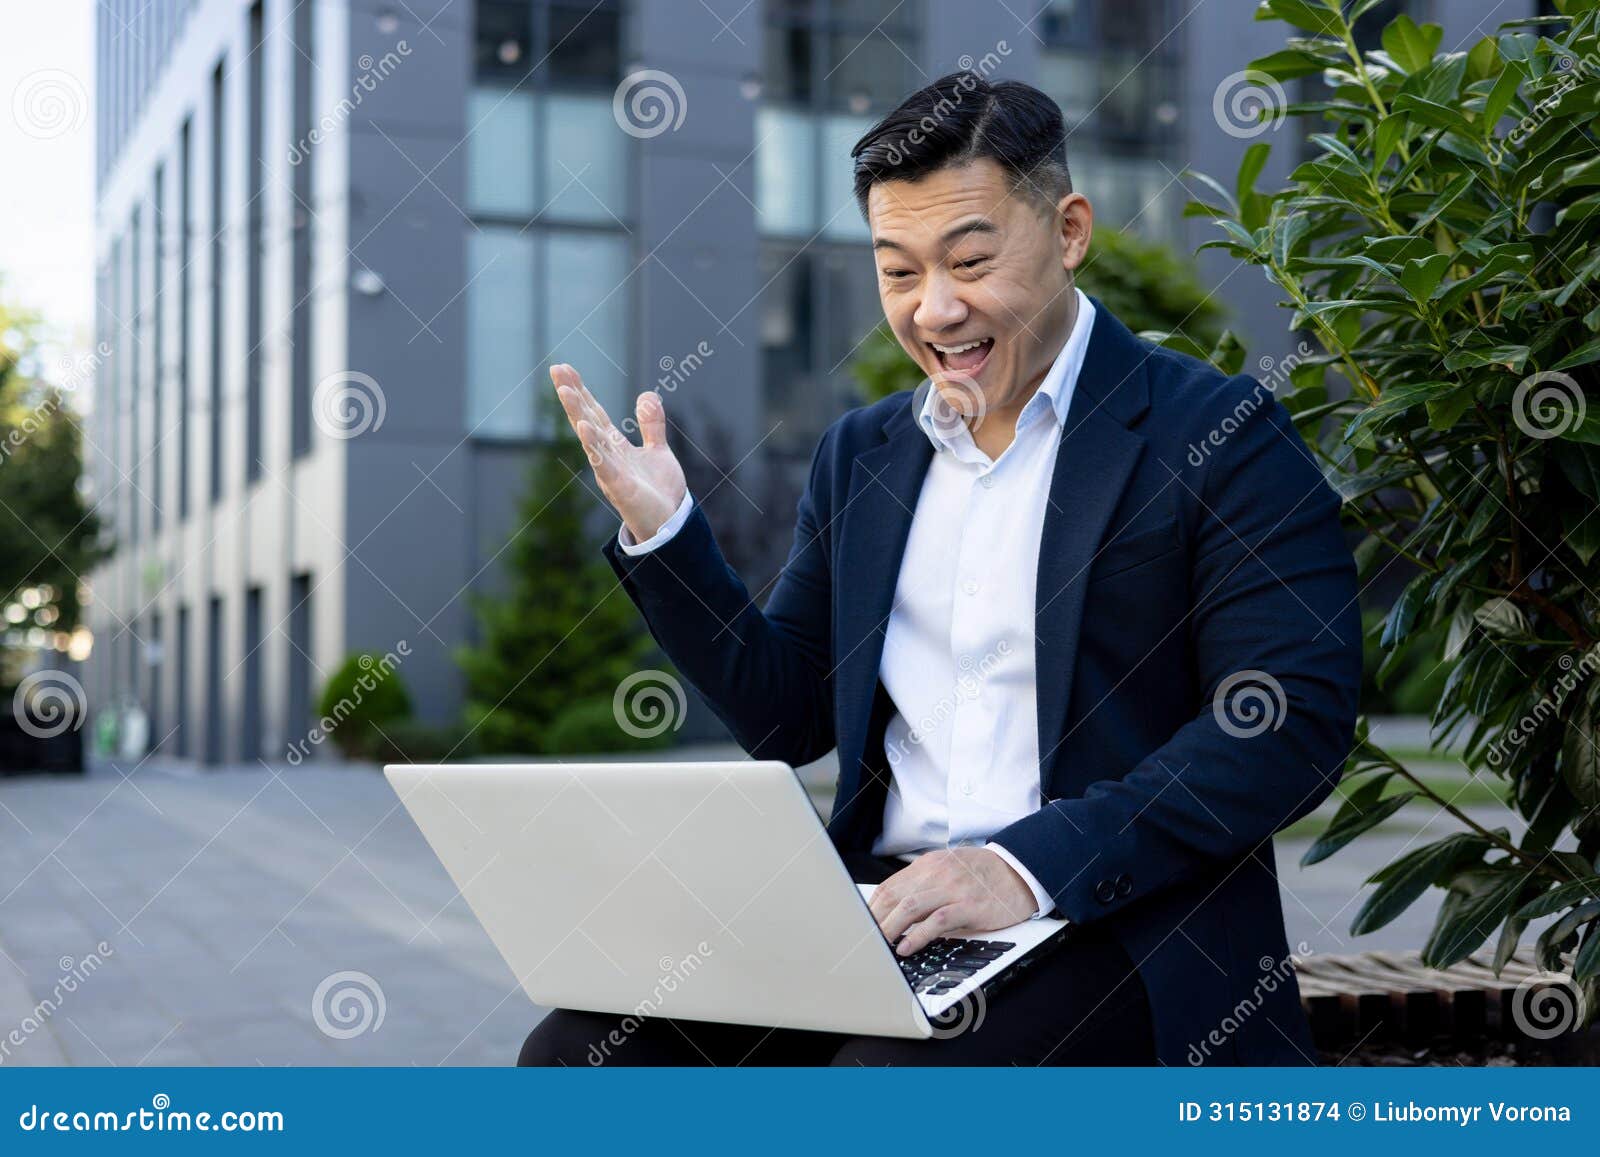 a happy young asian male businessman is sitting outside an office building and smilingly looking at the screen of a